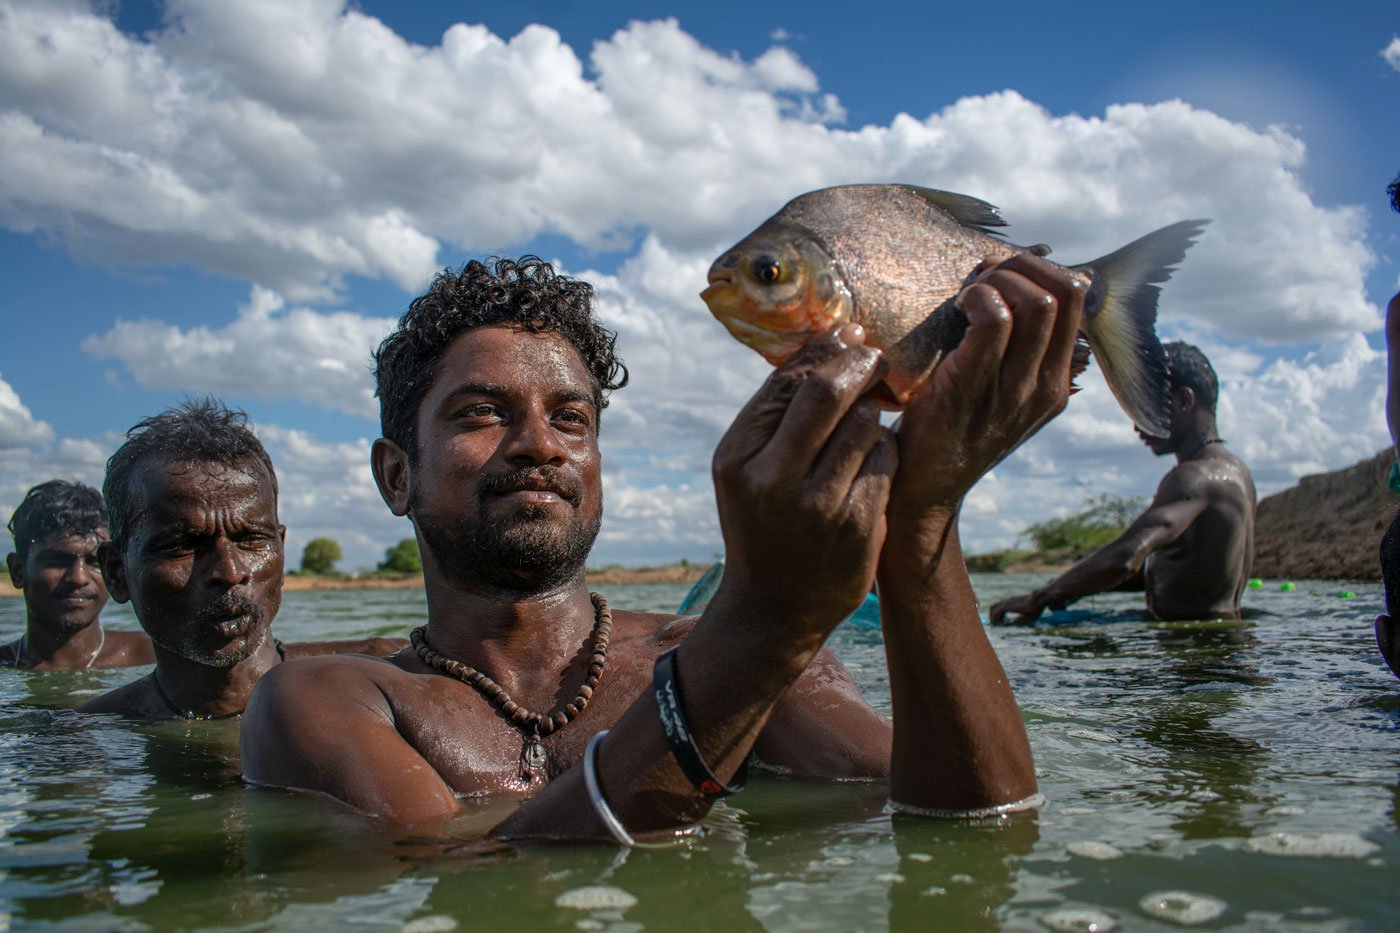 Senthil Kalai shows his catch of kamma paarai fish. He enjoys posing for pictures